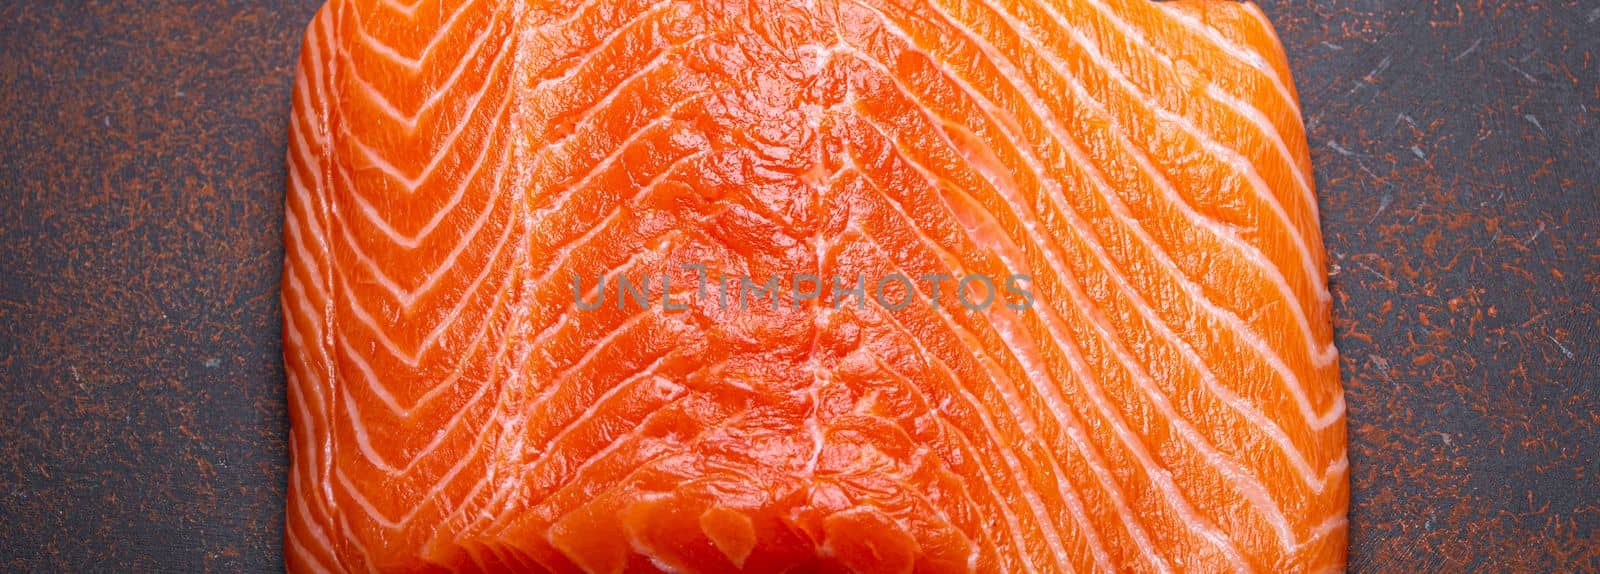 Piece of fresh Norwegian raw salmon fillet on dark brown rustic background top view, healthy nutrition and diet by its_al_dente